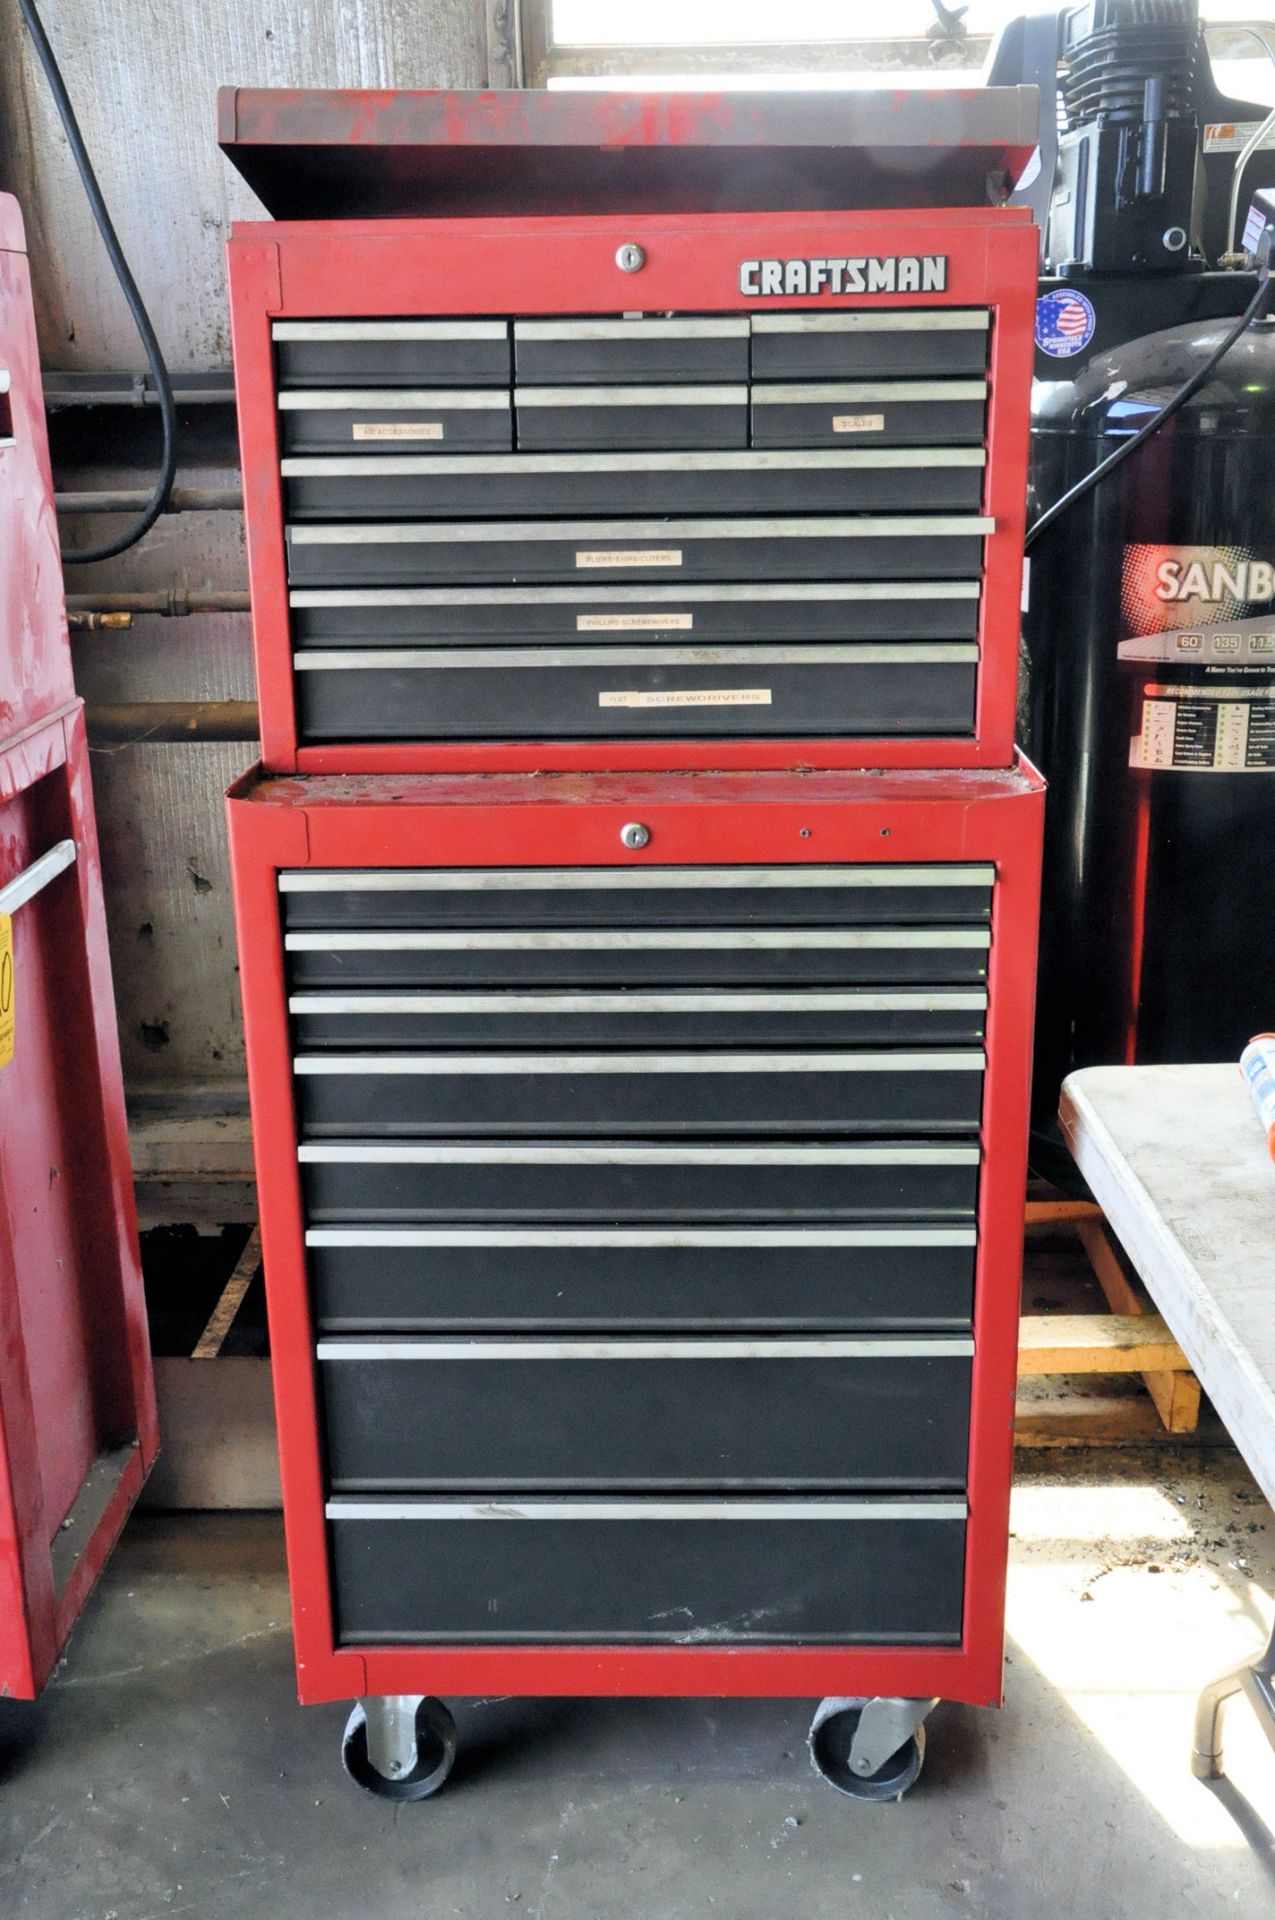 Craftsman 2-Piece Rolling Tool Chest